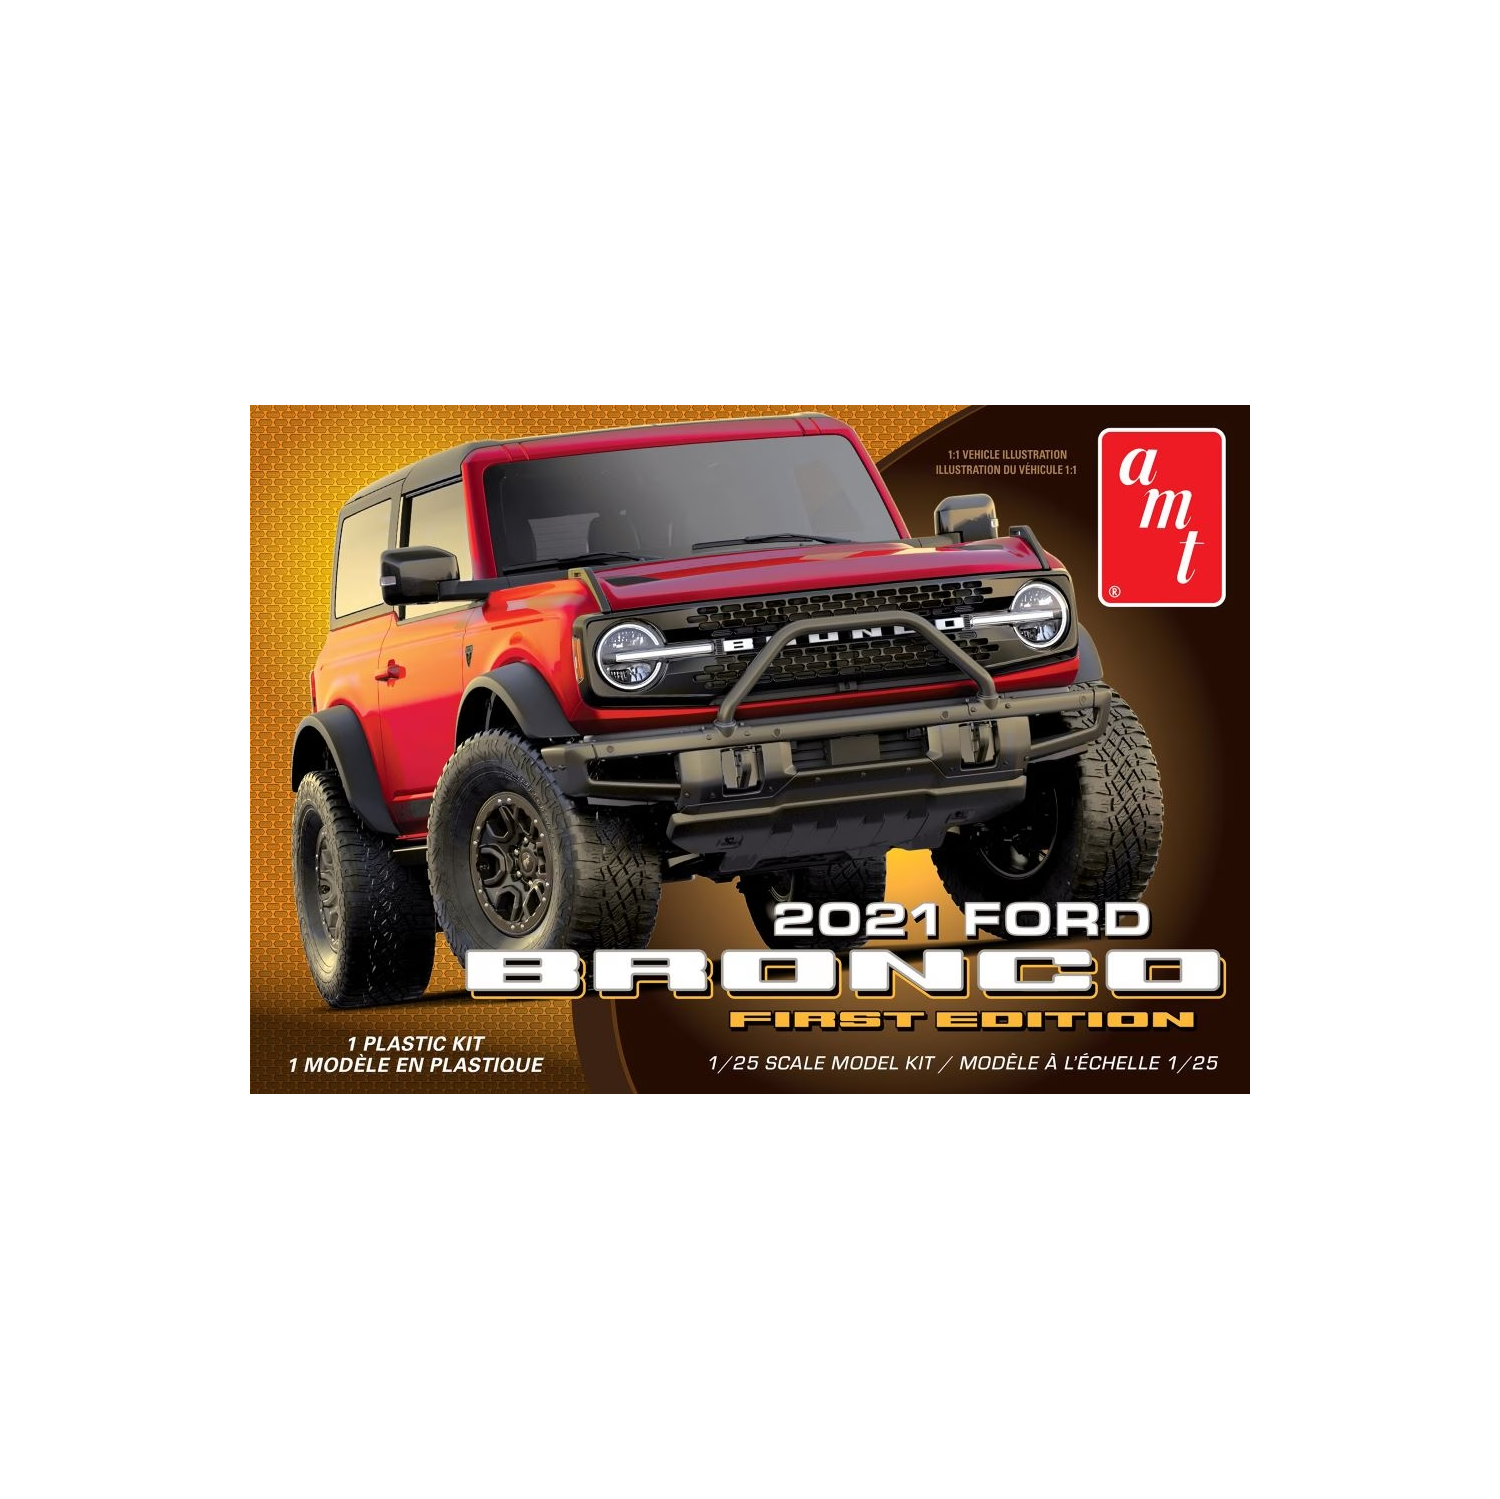 Aluminum Model Toys (AMT) 2021 Ford Bronco First Edition (AMT1343) 1:25 Scale Car Plastic Model Kit